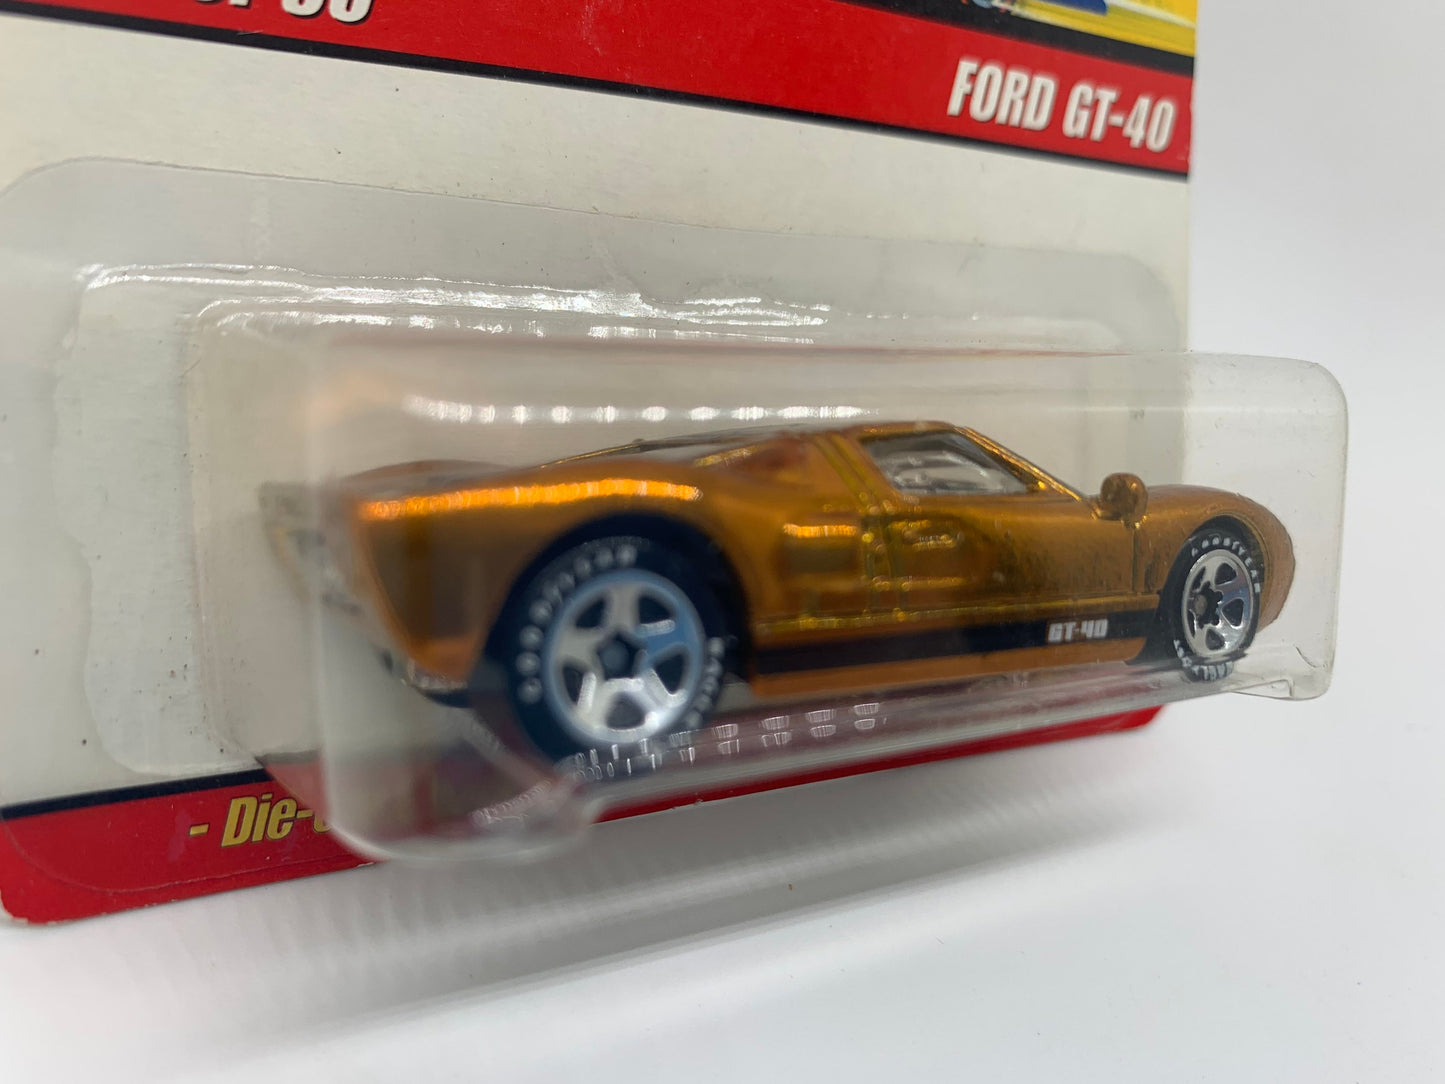 Hot Wheels Ford GT40 Spectraflame Gold Hot Wheels Classics Series 2 Perfect Birthday Gift Miniature Collectable Model Toy Car